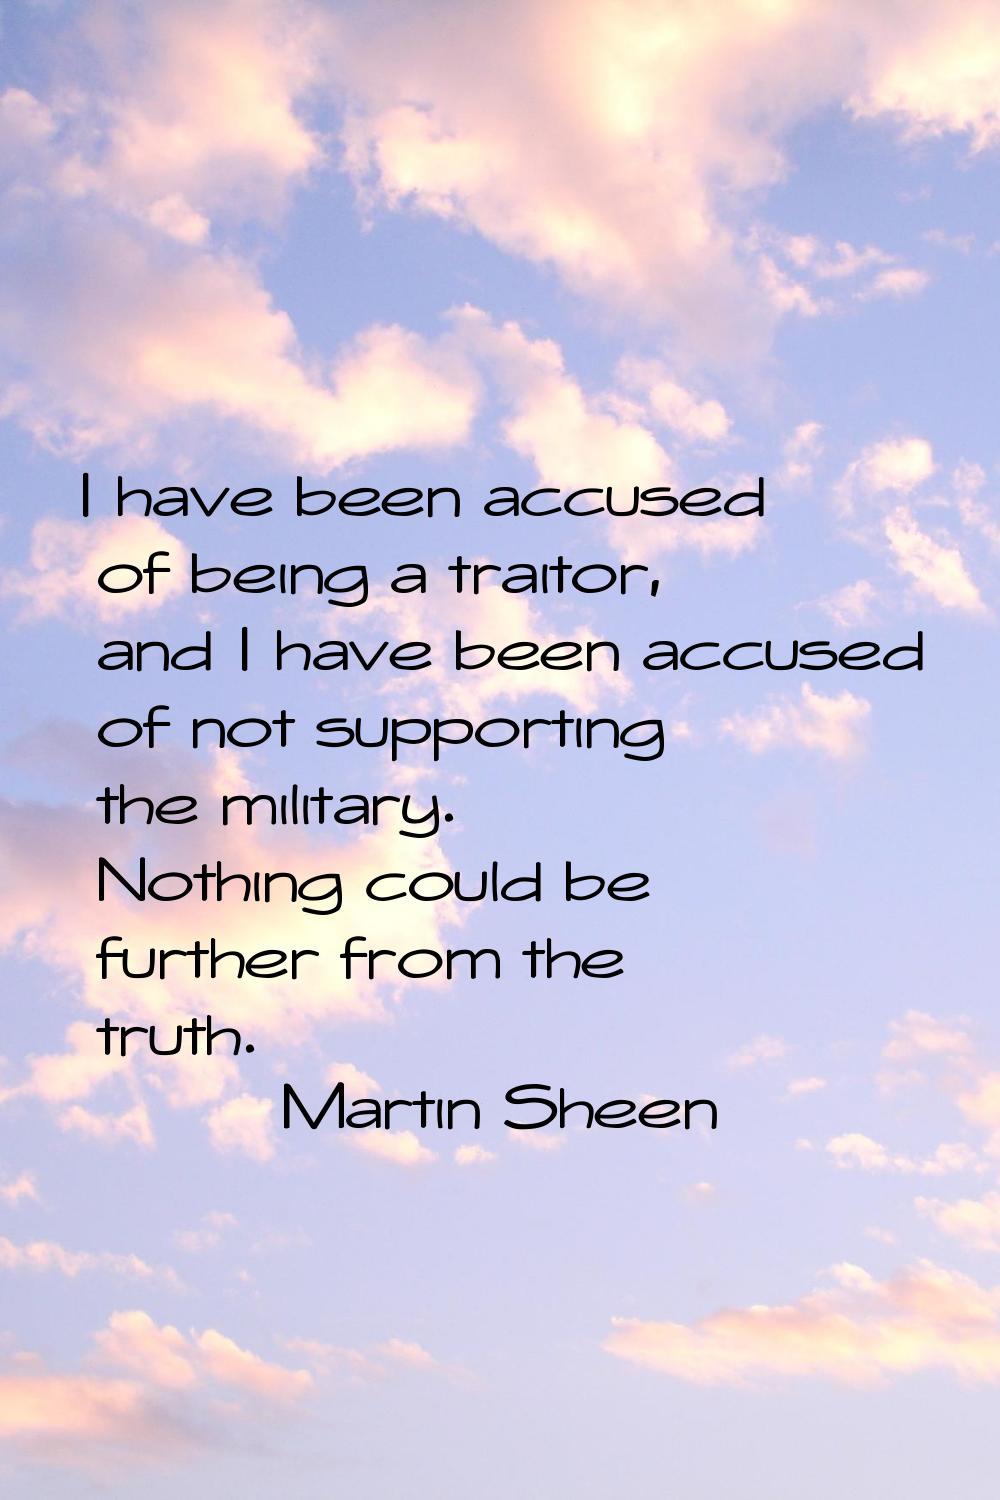 I have been accused of being a traitor, and I have been accused of not supporting the military. Not